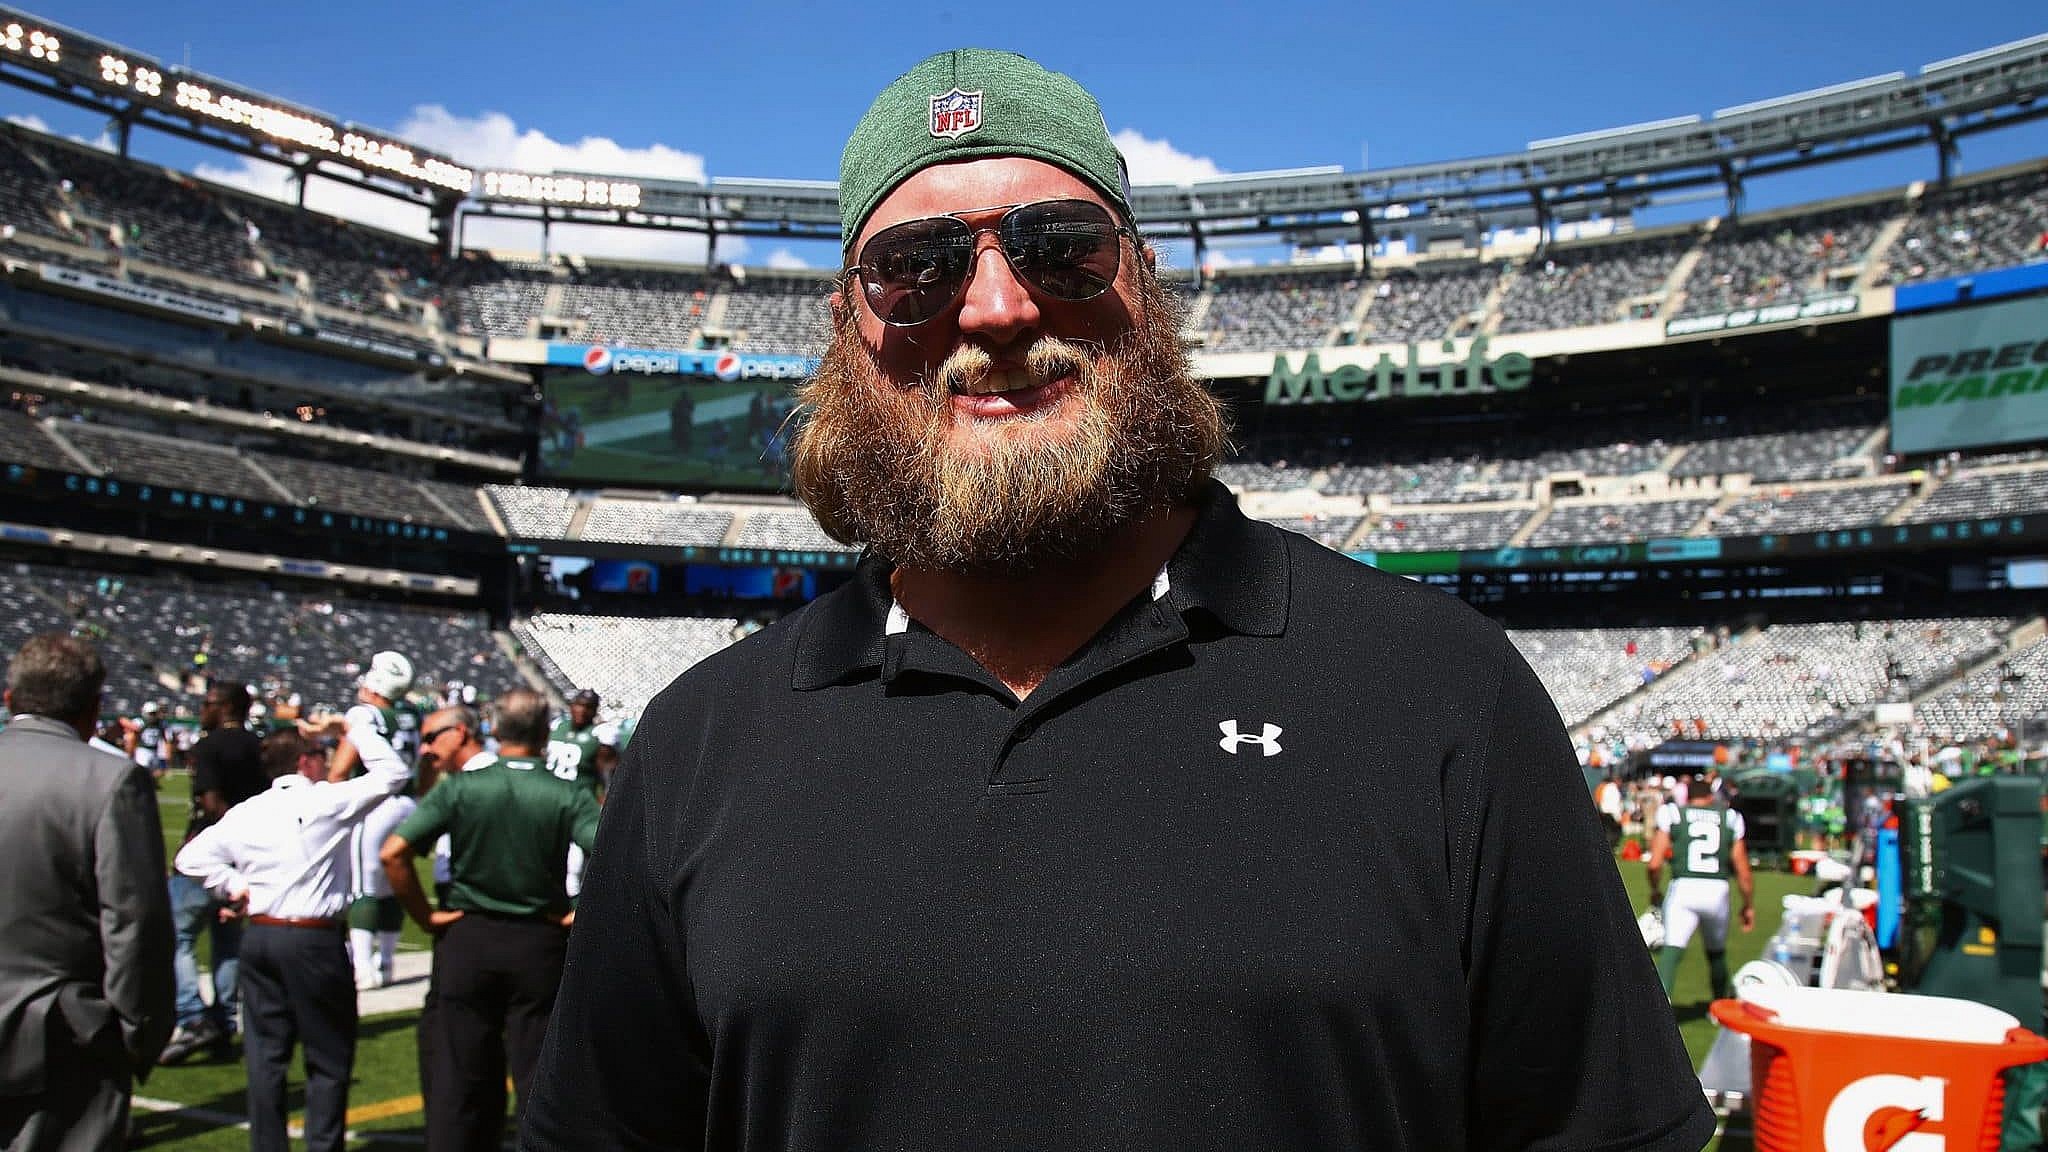 EAST RUTHERFORD, NJ - SEPTEMBER 16: Former New York Jets star Nick Mangold attends the Miami Dolphins vs New York Jets game at MetLife Stadium on September 16, 2018 in East Rutherford, New Jersey.